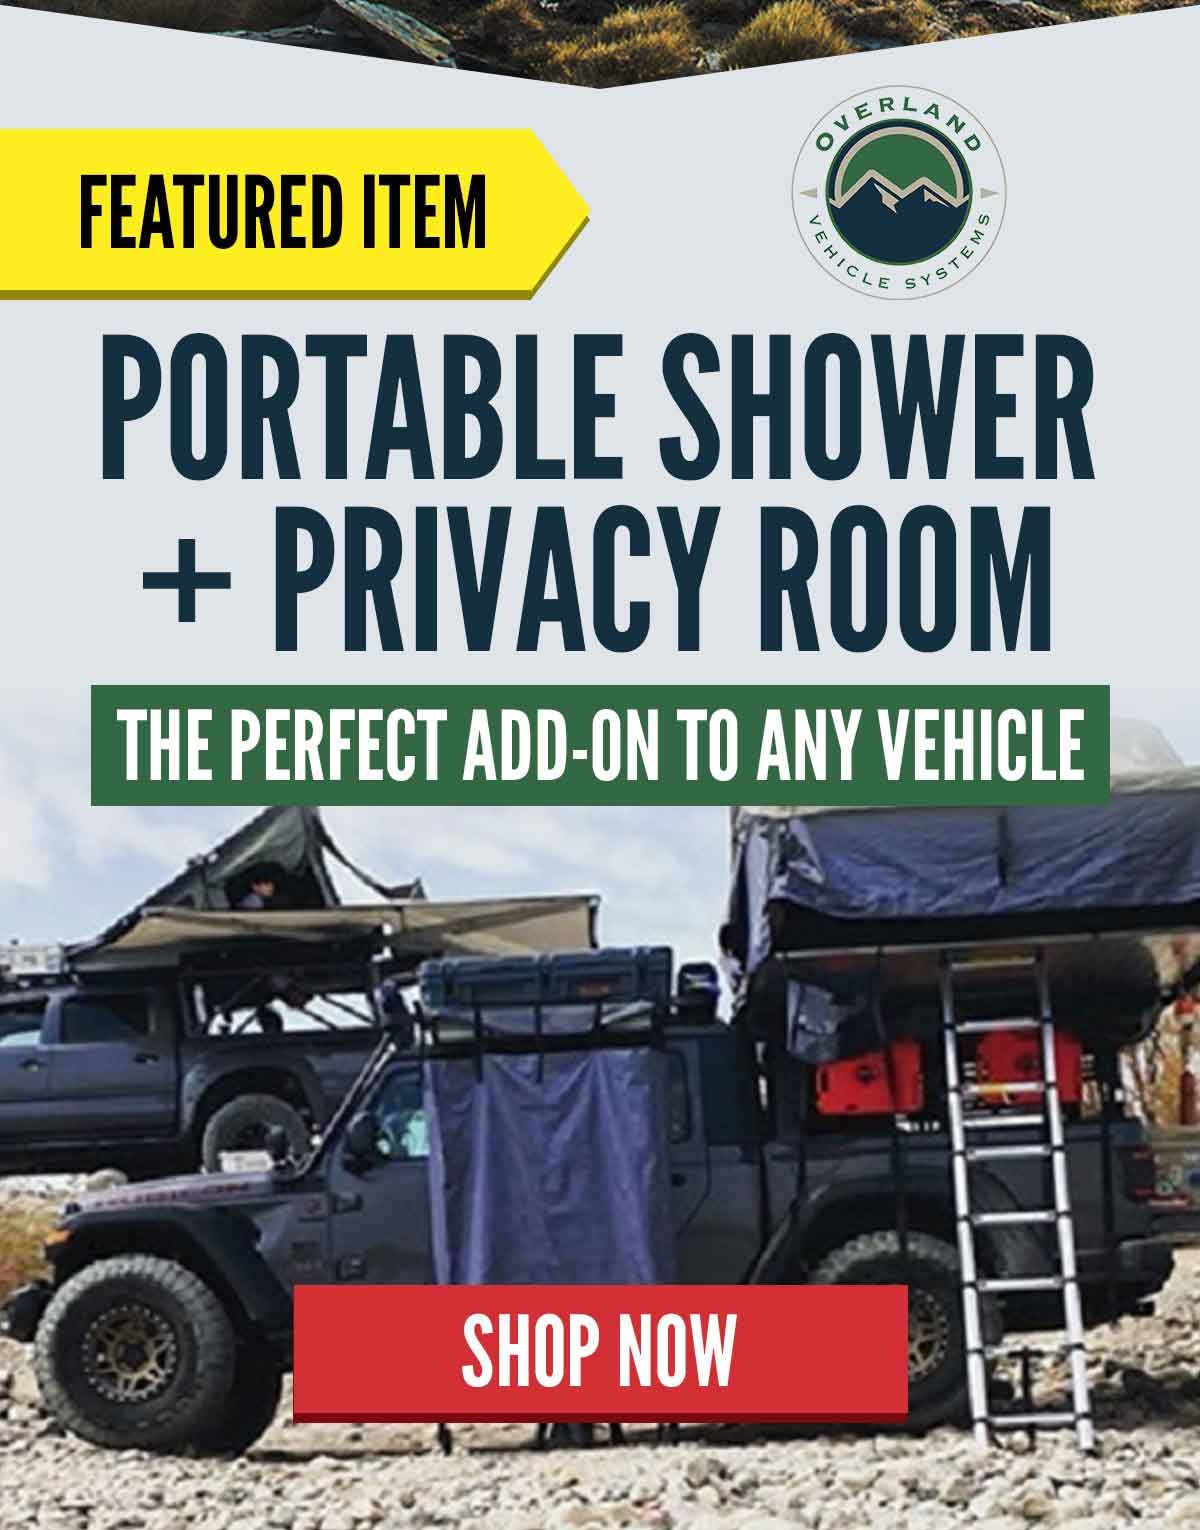 Featured Item: Portable Shower + Privacy Room The Perfect Add-on to Any Vehicle